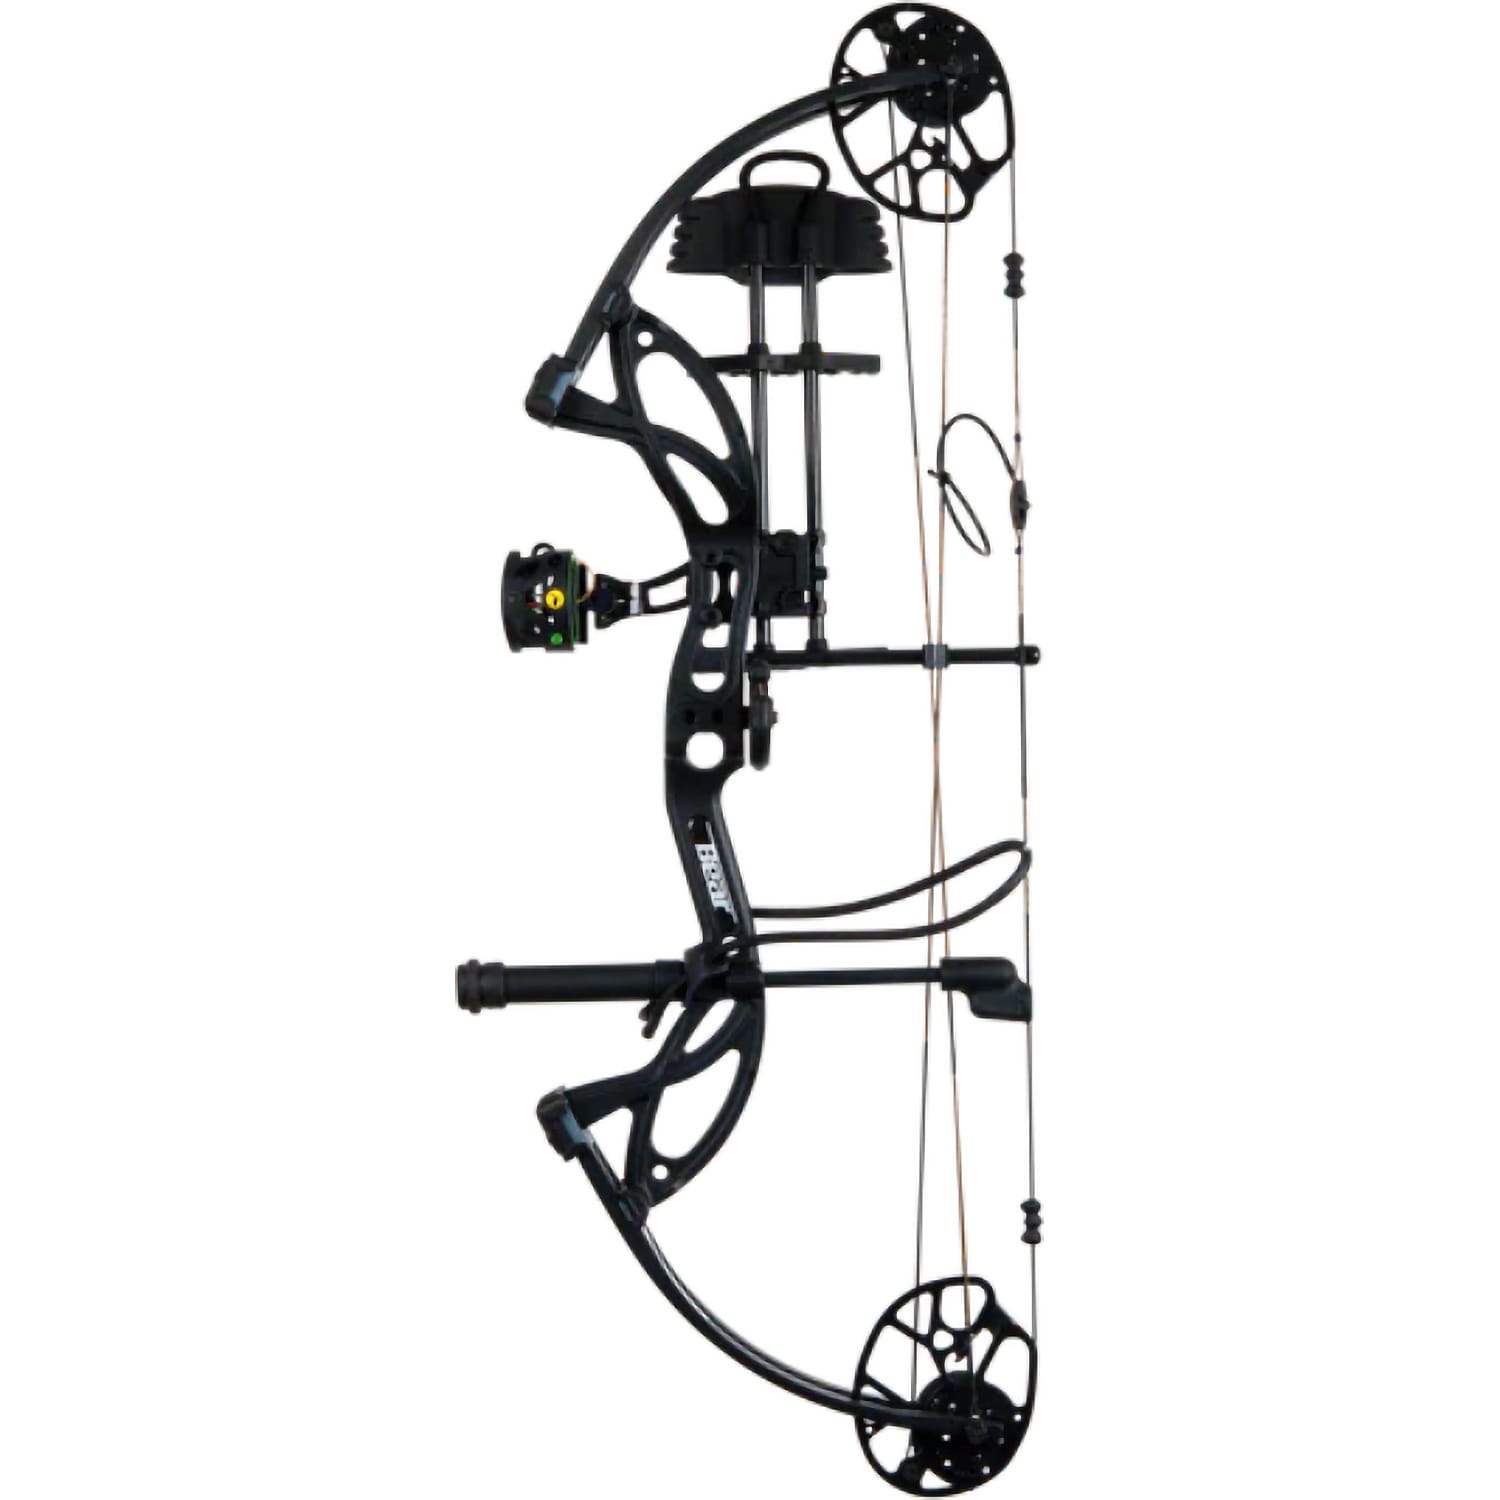 Bear Archery® Cruzer G3 RTH Compound Bow Package